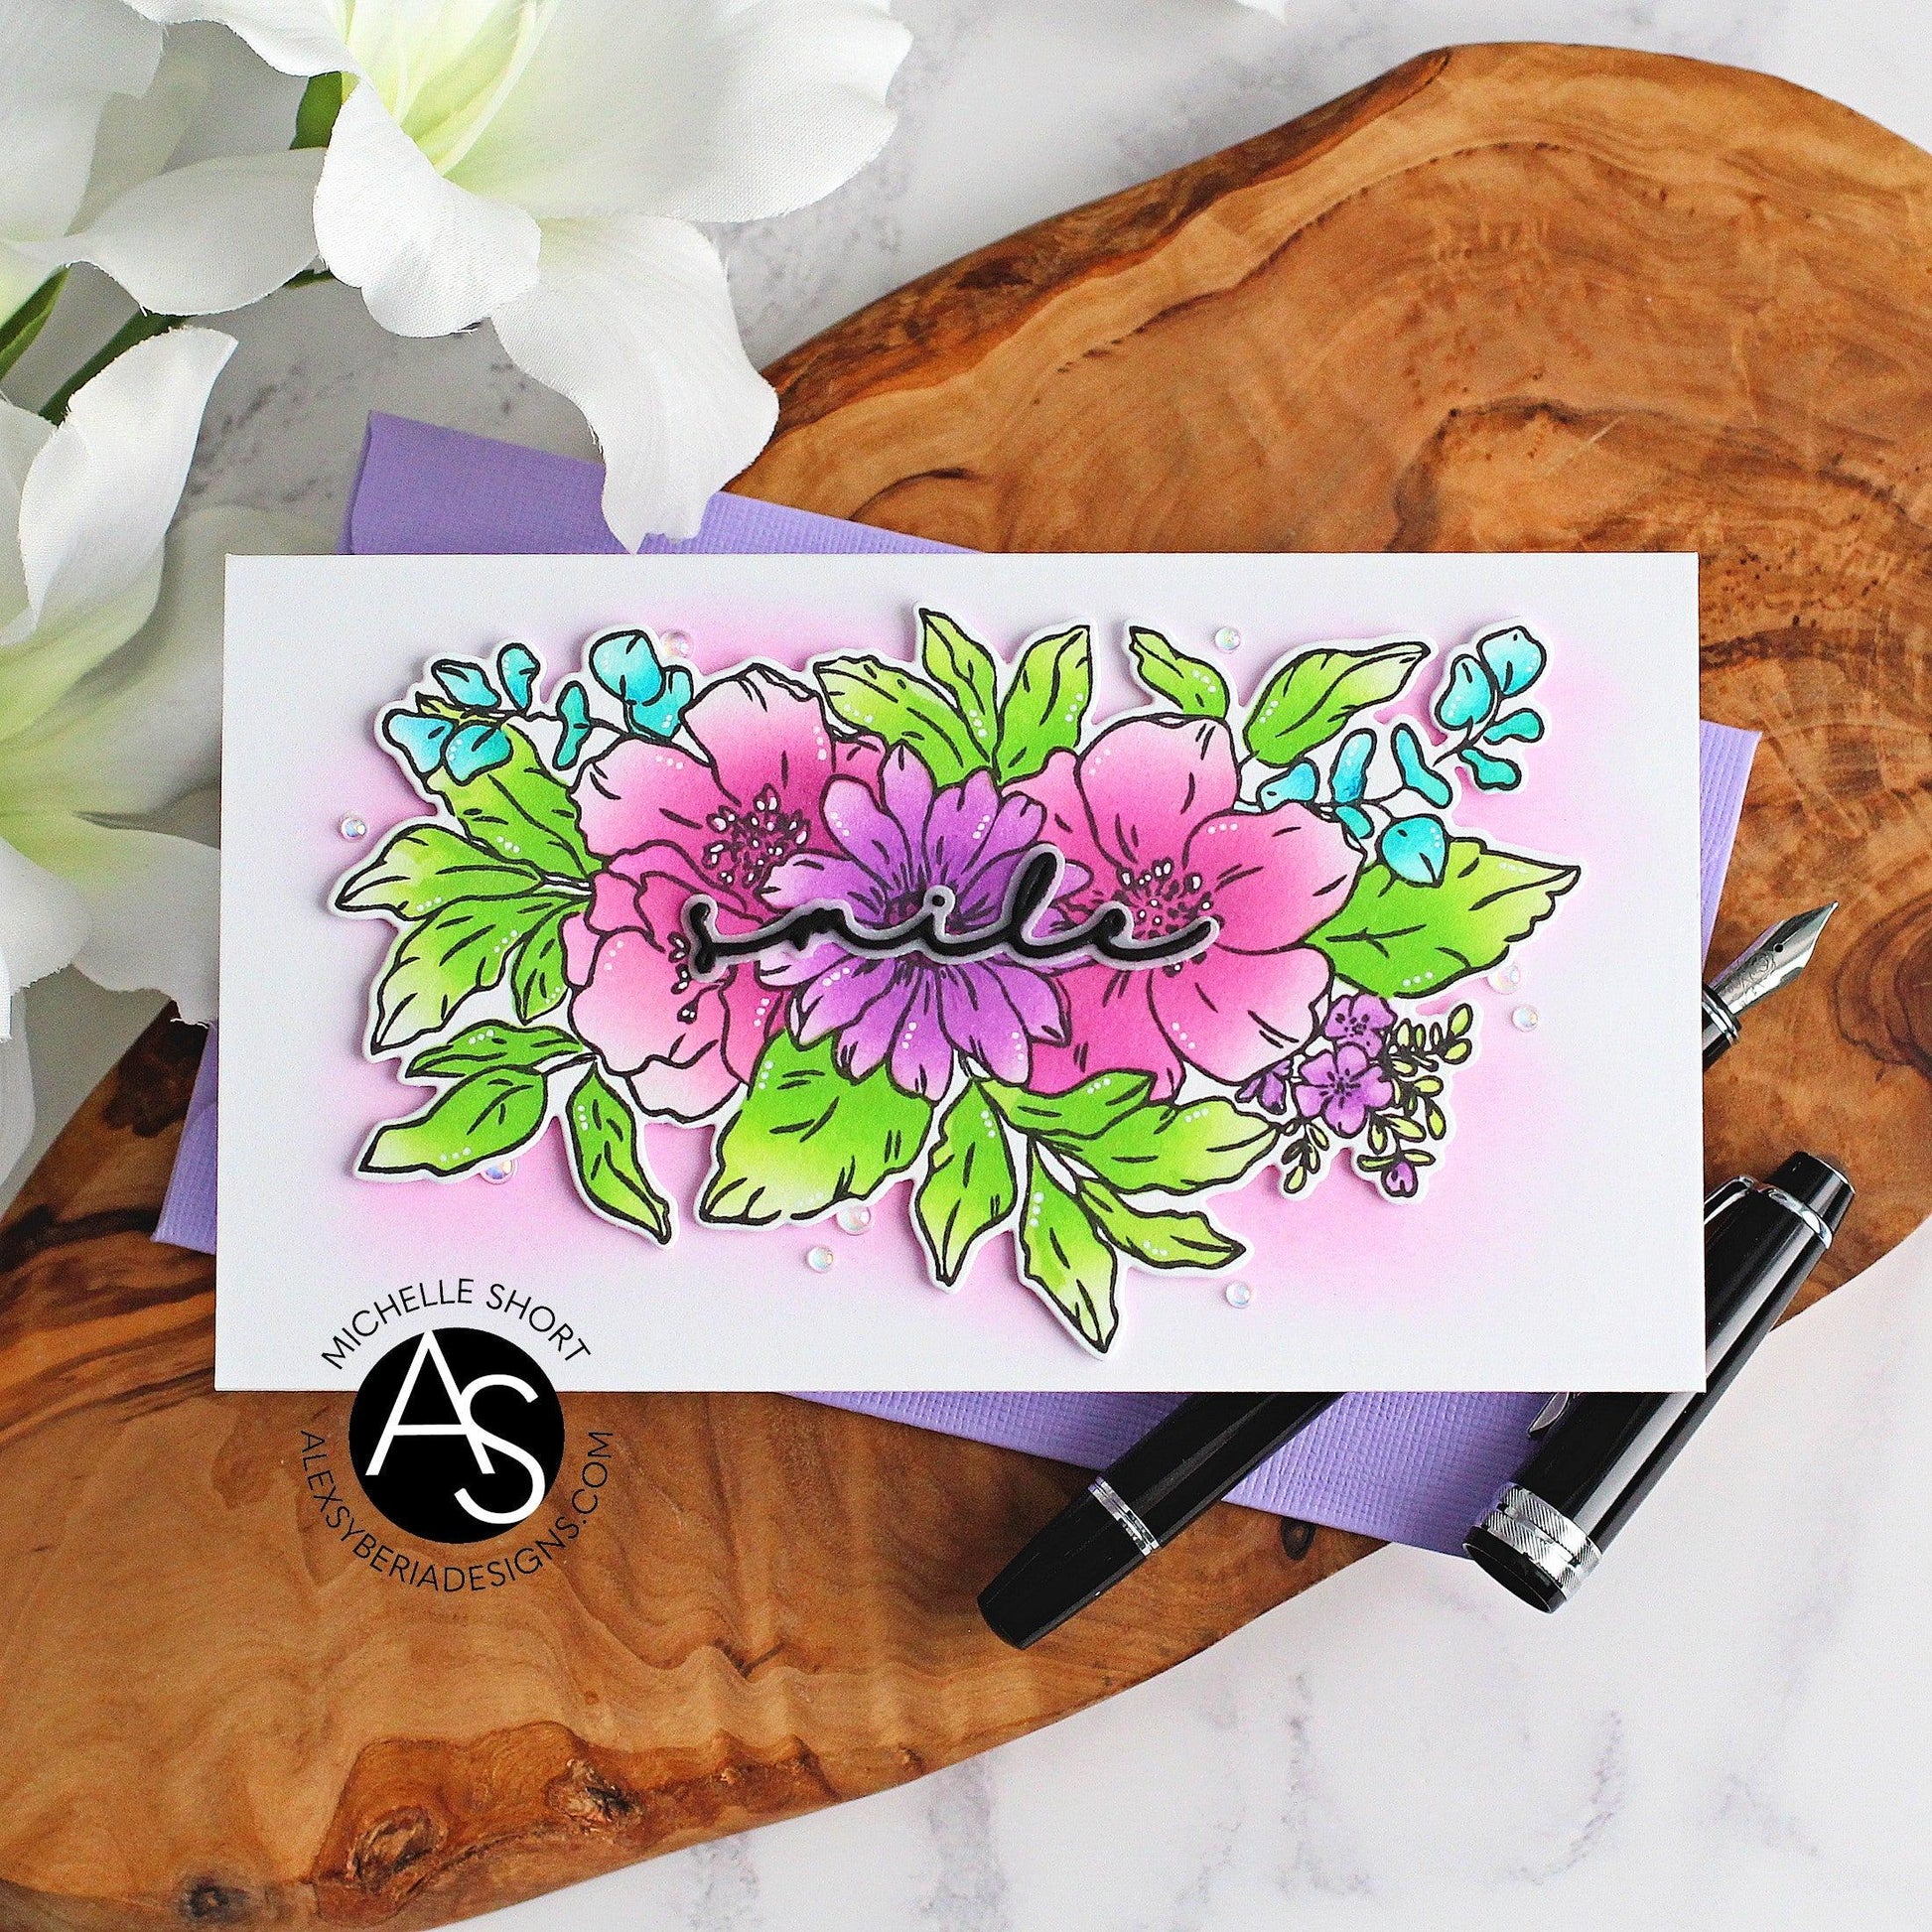 life-is-good-stamp-set-alex-syberia-designs-bouquet-coloring-cardmaking-tutorial-floral-card-famous-cardmaking-brands-copic-coloring-handmadecards-layering-stencils-embossing-smile-word-die-cover-stripes-cas-cards